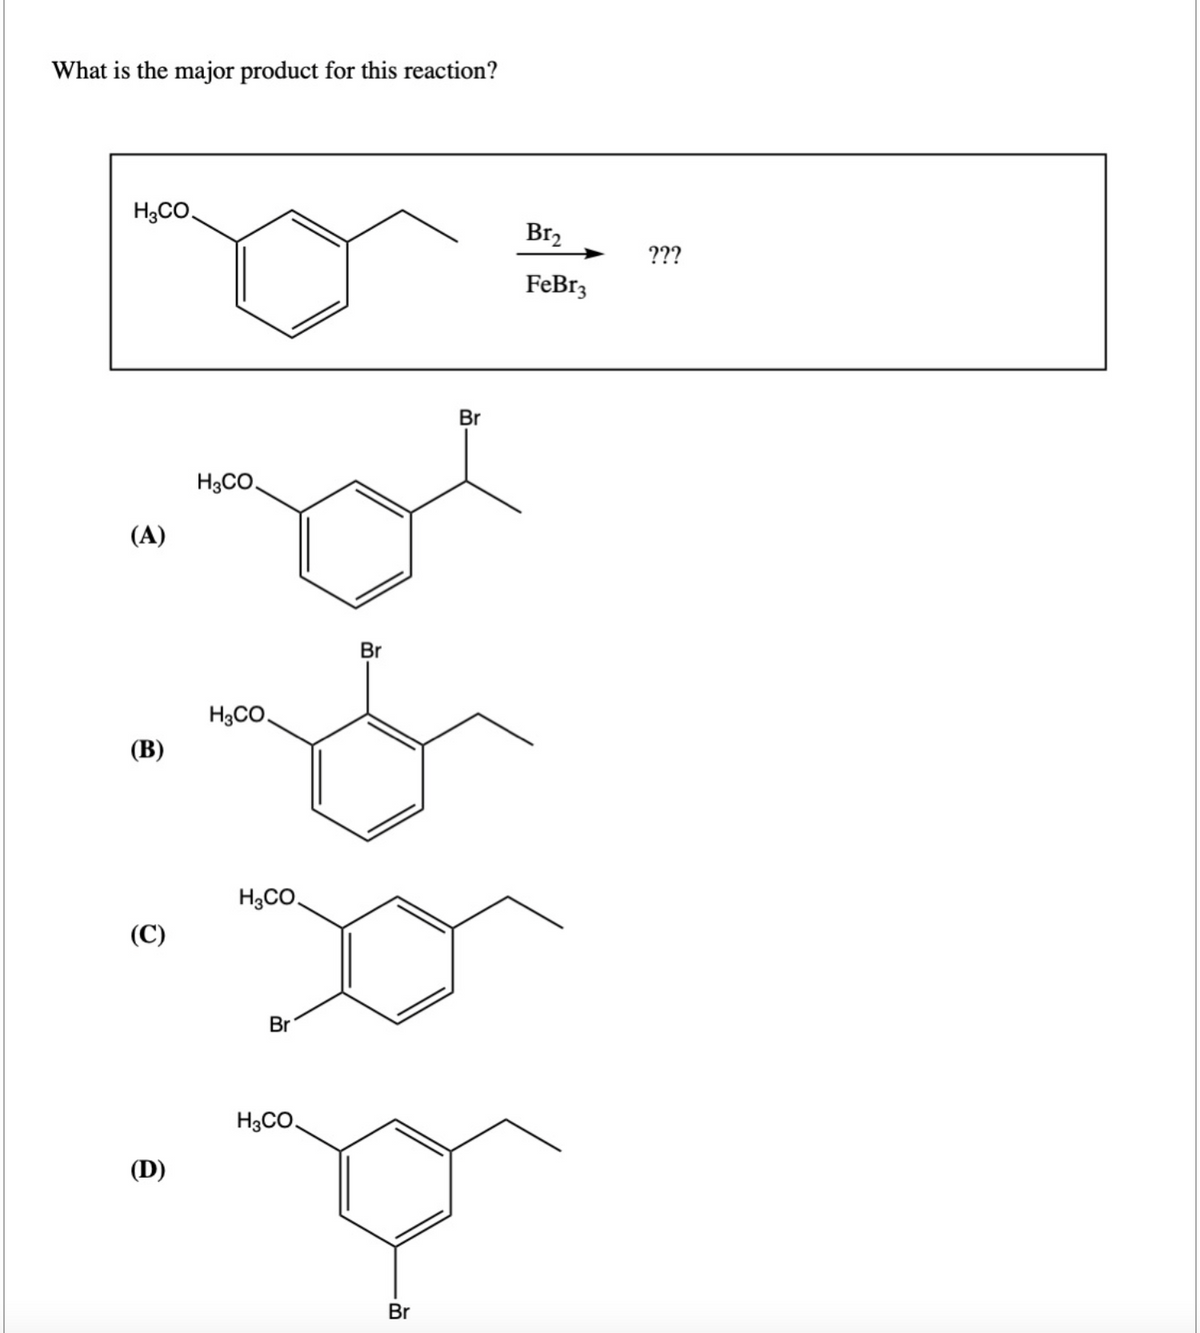 What is the major product for this reaction?
H3CO
(A)
(B)
(C)
(D)
H3CO.
H3CO
H3CO
Br
H3CO.
Br
Br
Br
Br₂
FeBr3
???